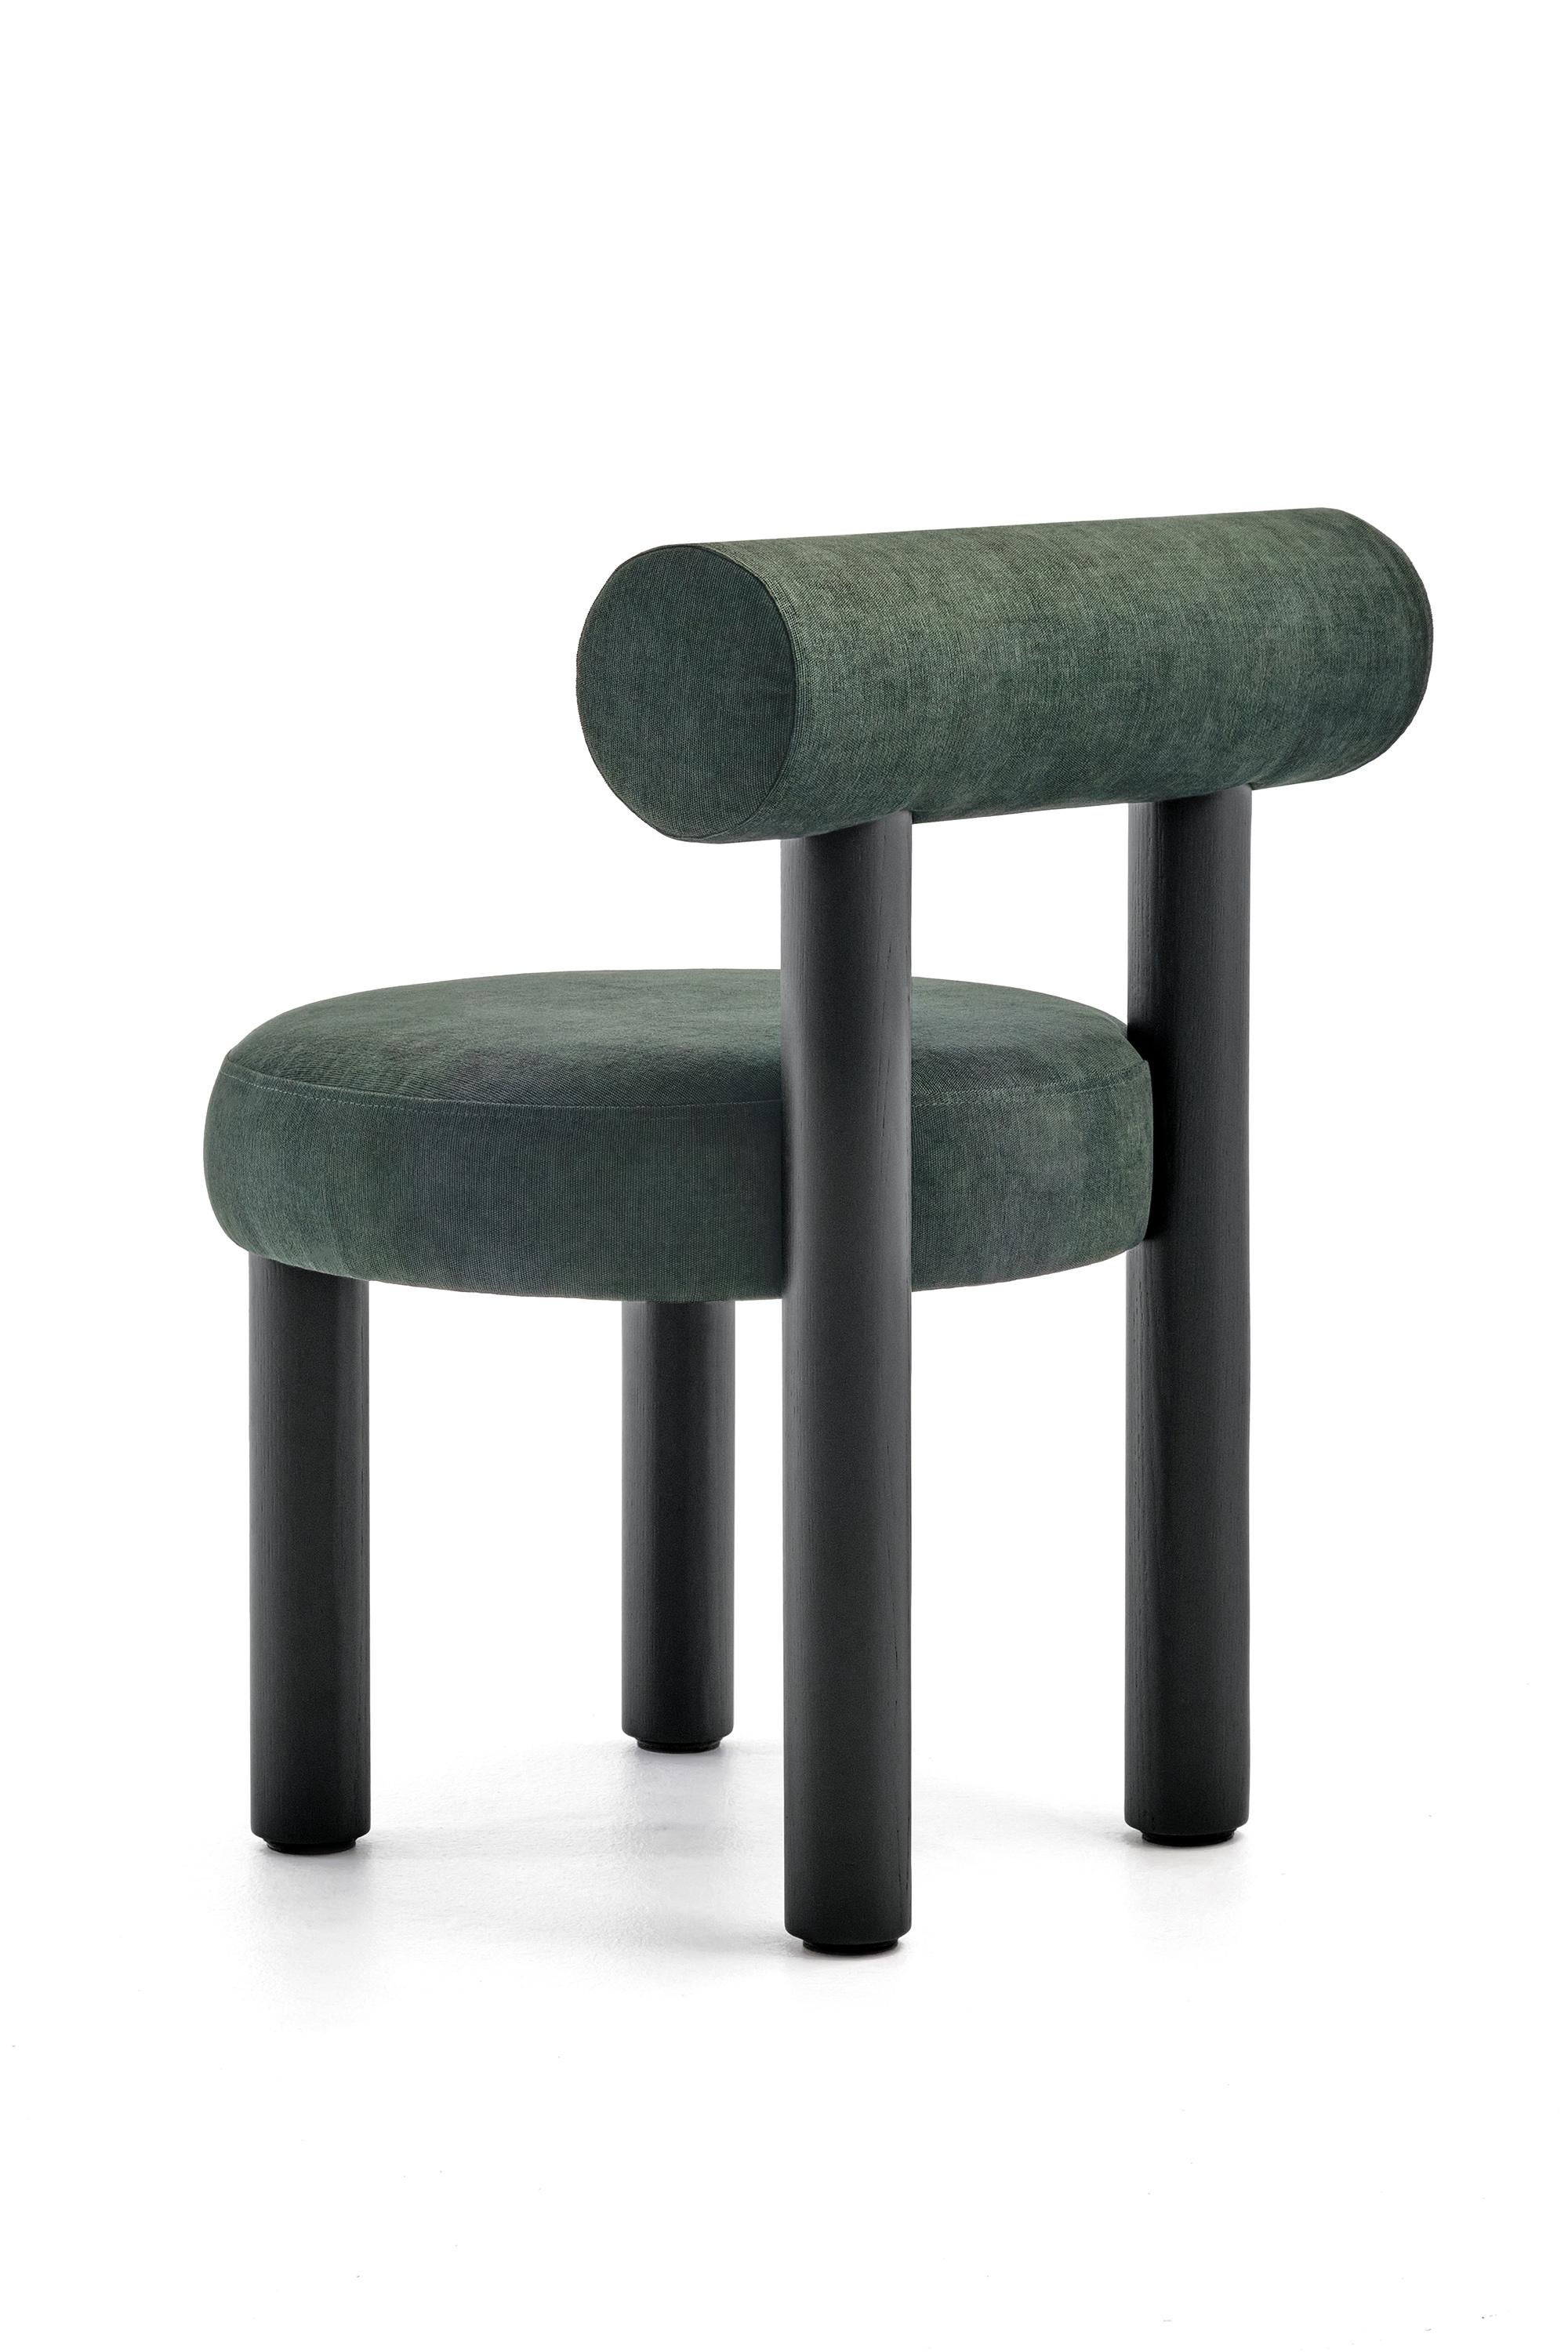 Modern Dining Chair Gropius CS2 in Wool Fabric with Wooden Legs by Noom 11